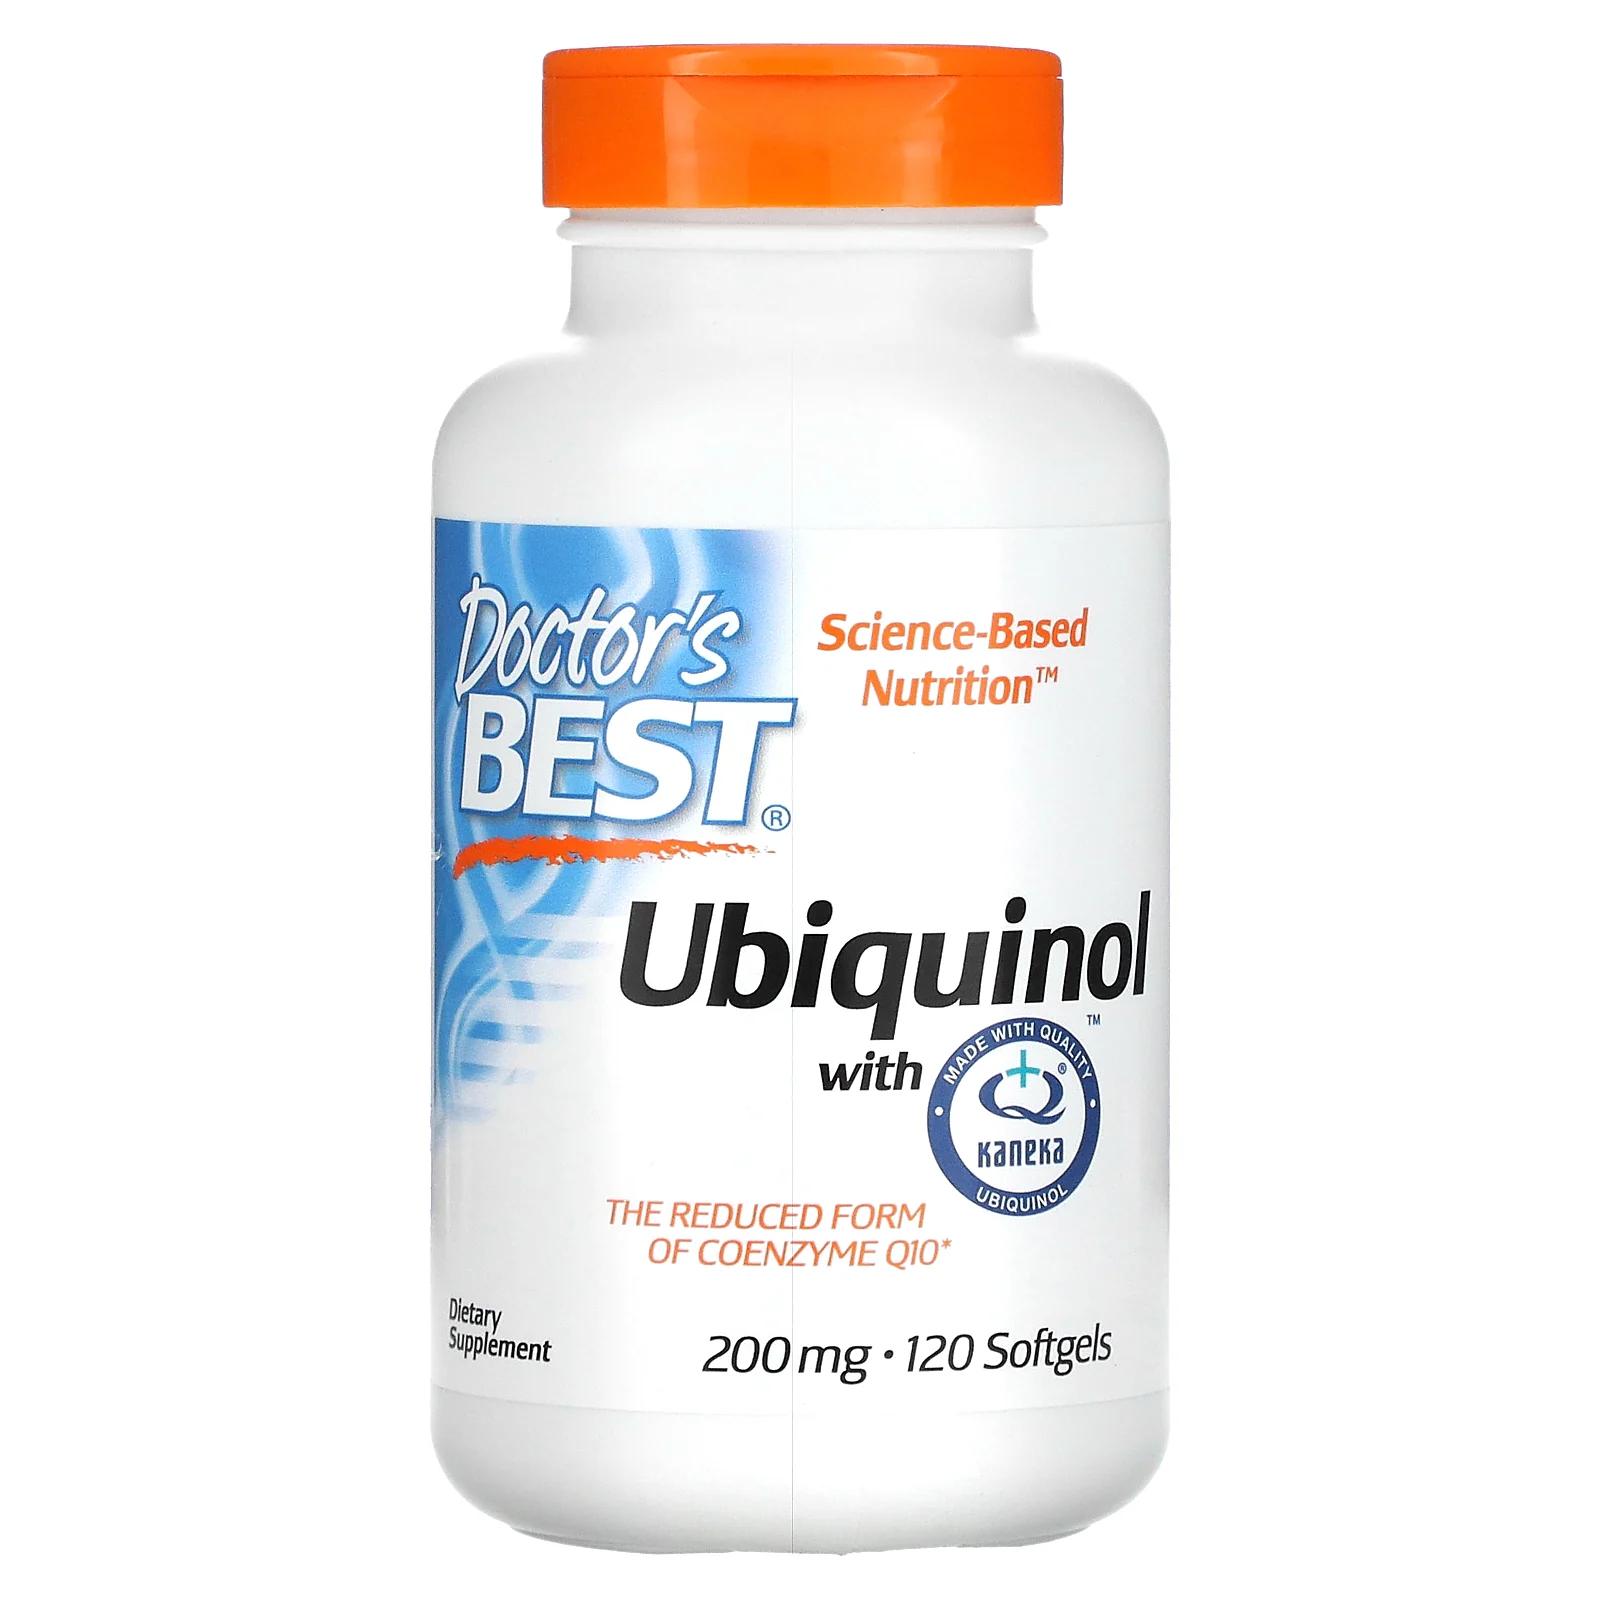 life extension super ubiquinol coq10 with enhanced mitochondrial support 100 mg 60 softgels Doctor's Best Ubiquinol with Kaneka 200 mg 120 Softgels